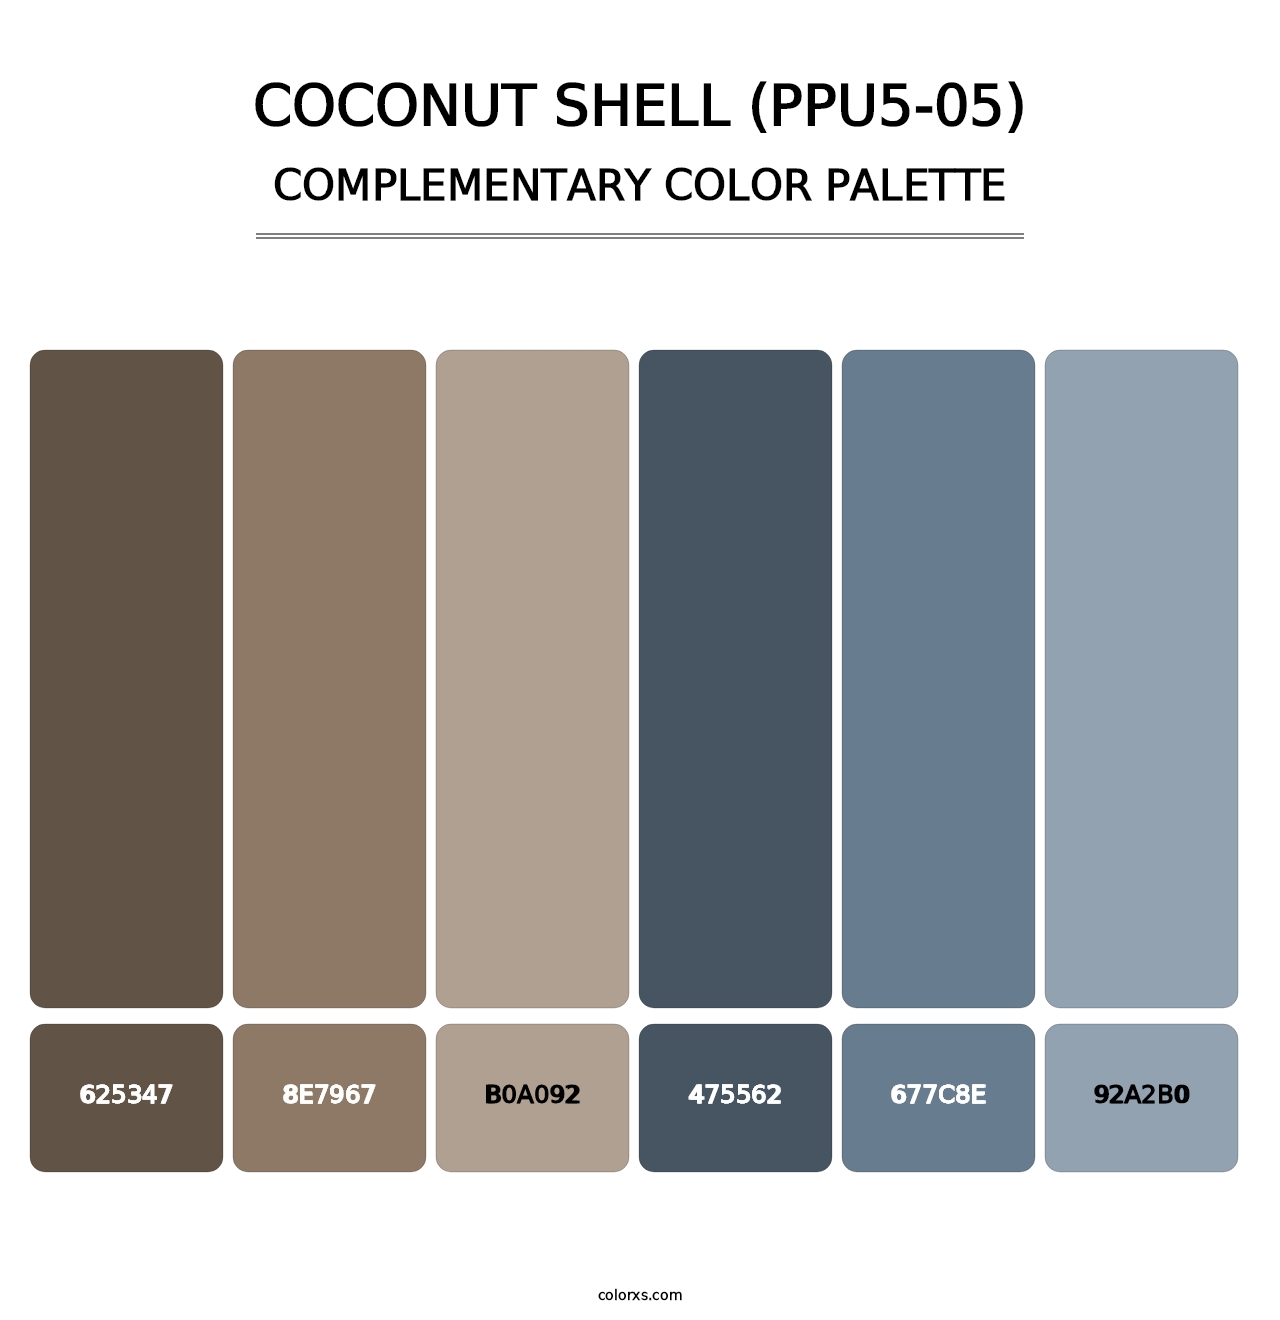 Coconut Shell (PPU5-05) - Complementary Color Palette